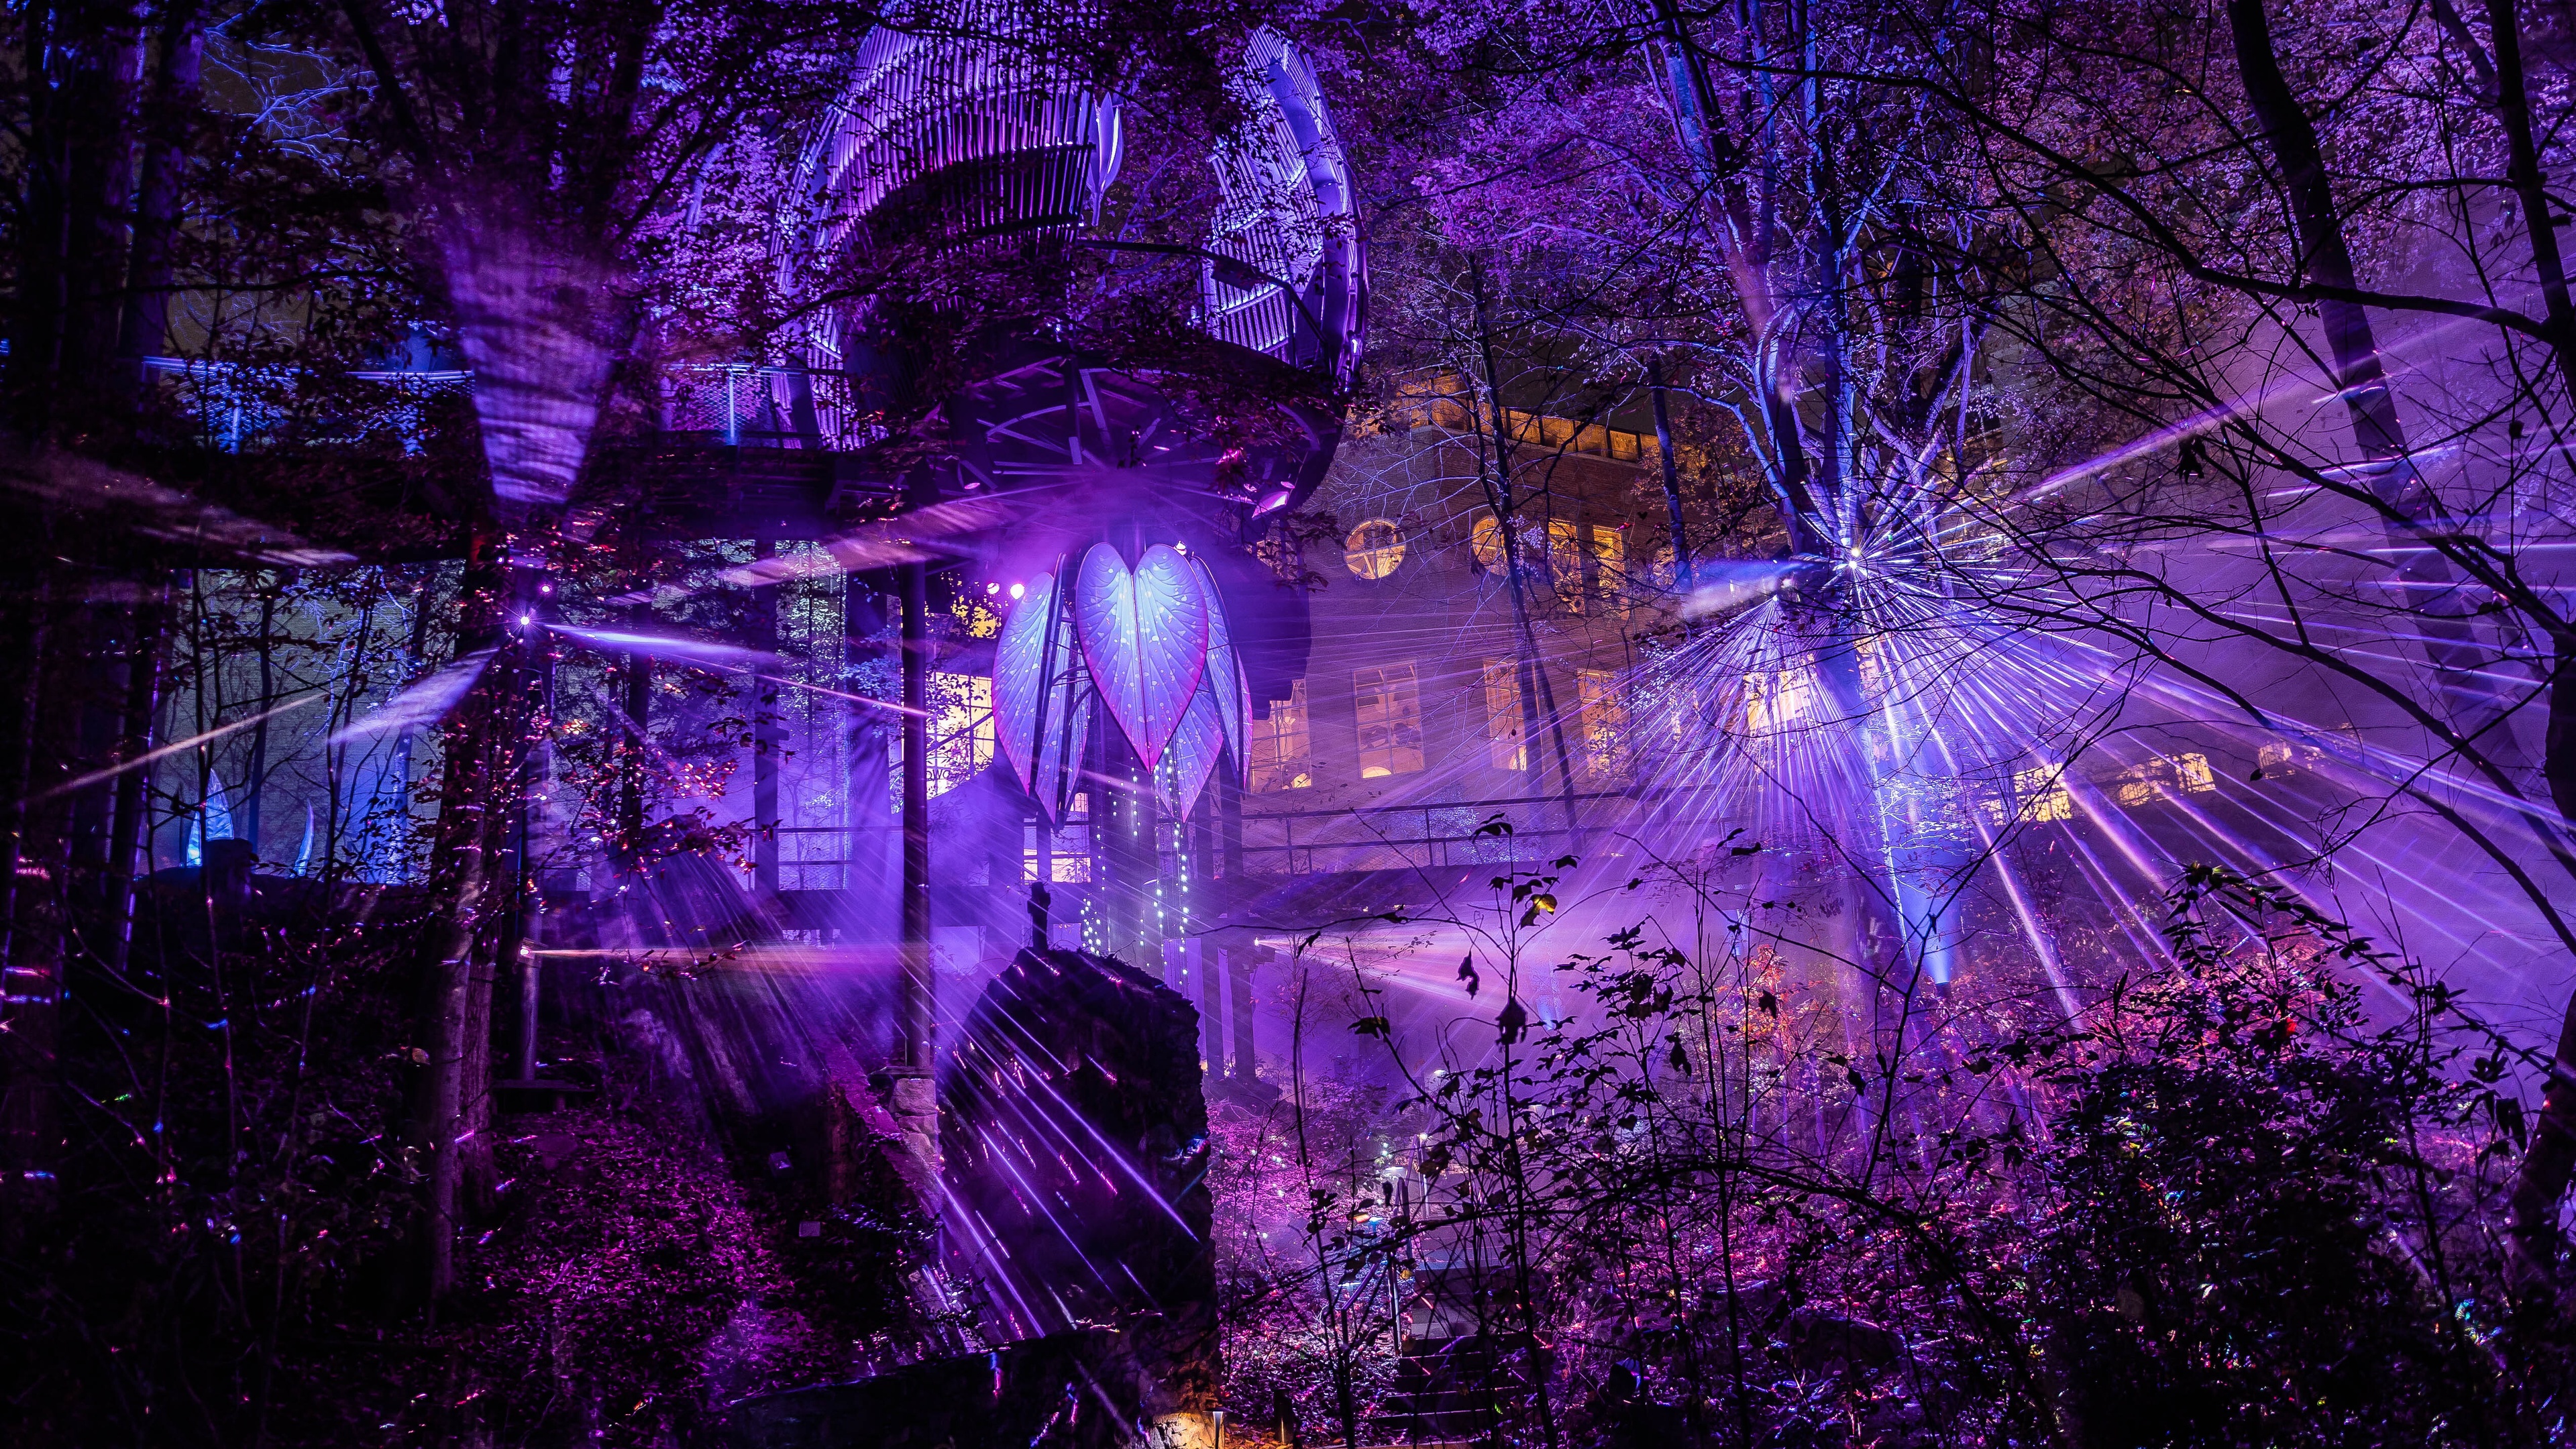 Purple lights and haze in a nighttime forest. There are large leaves with projection mapping in the center of the image and a dimly lit building in the background.